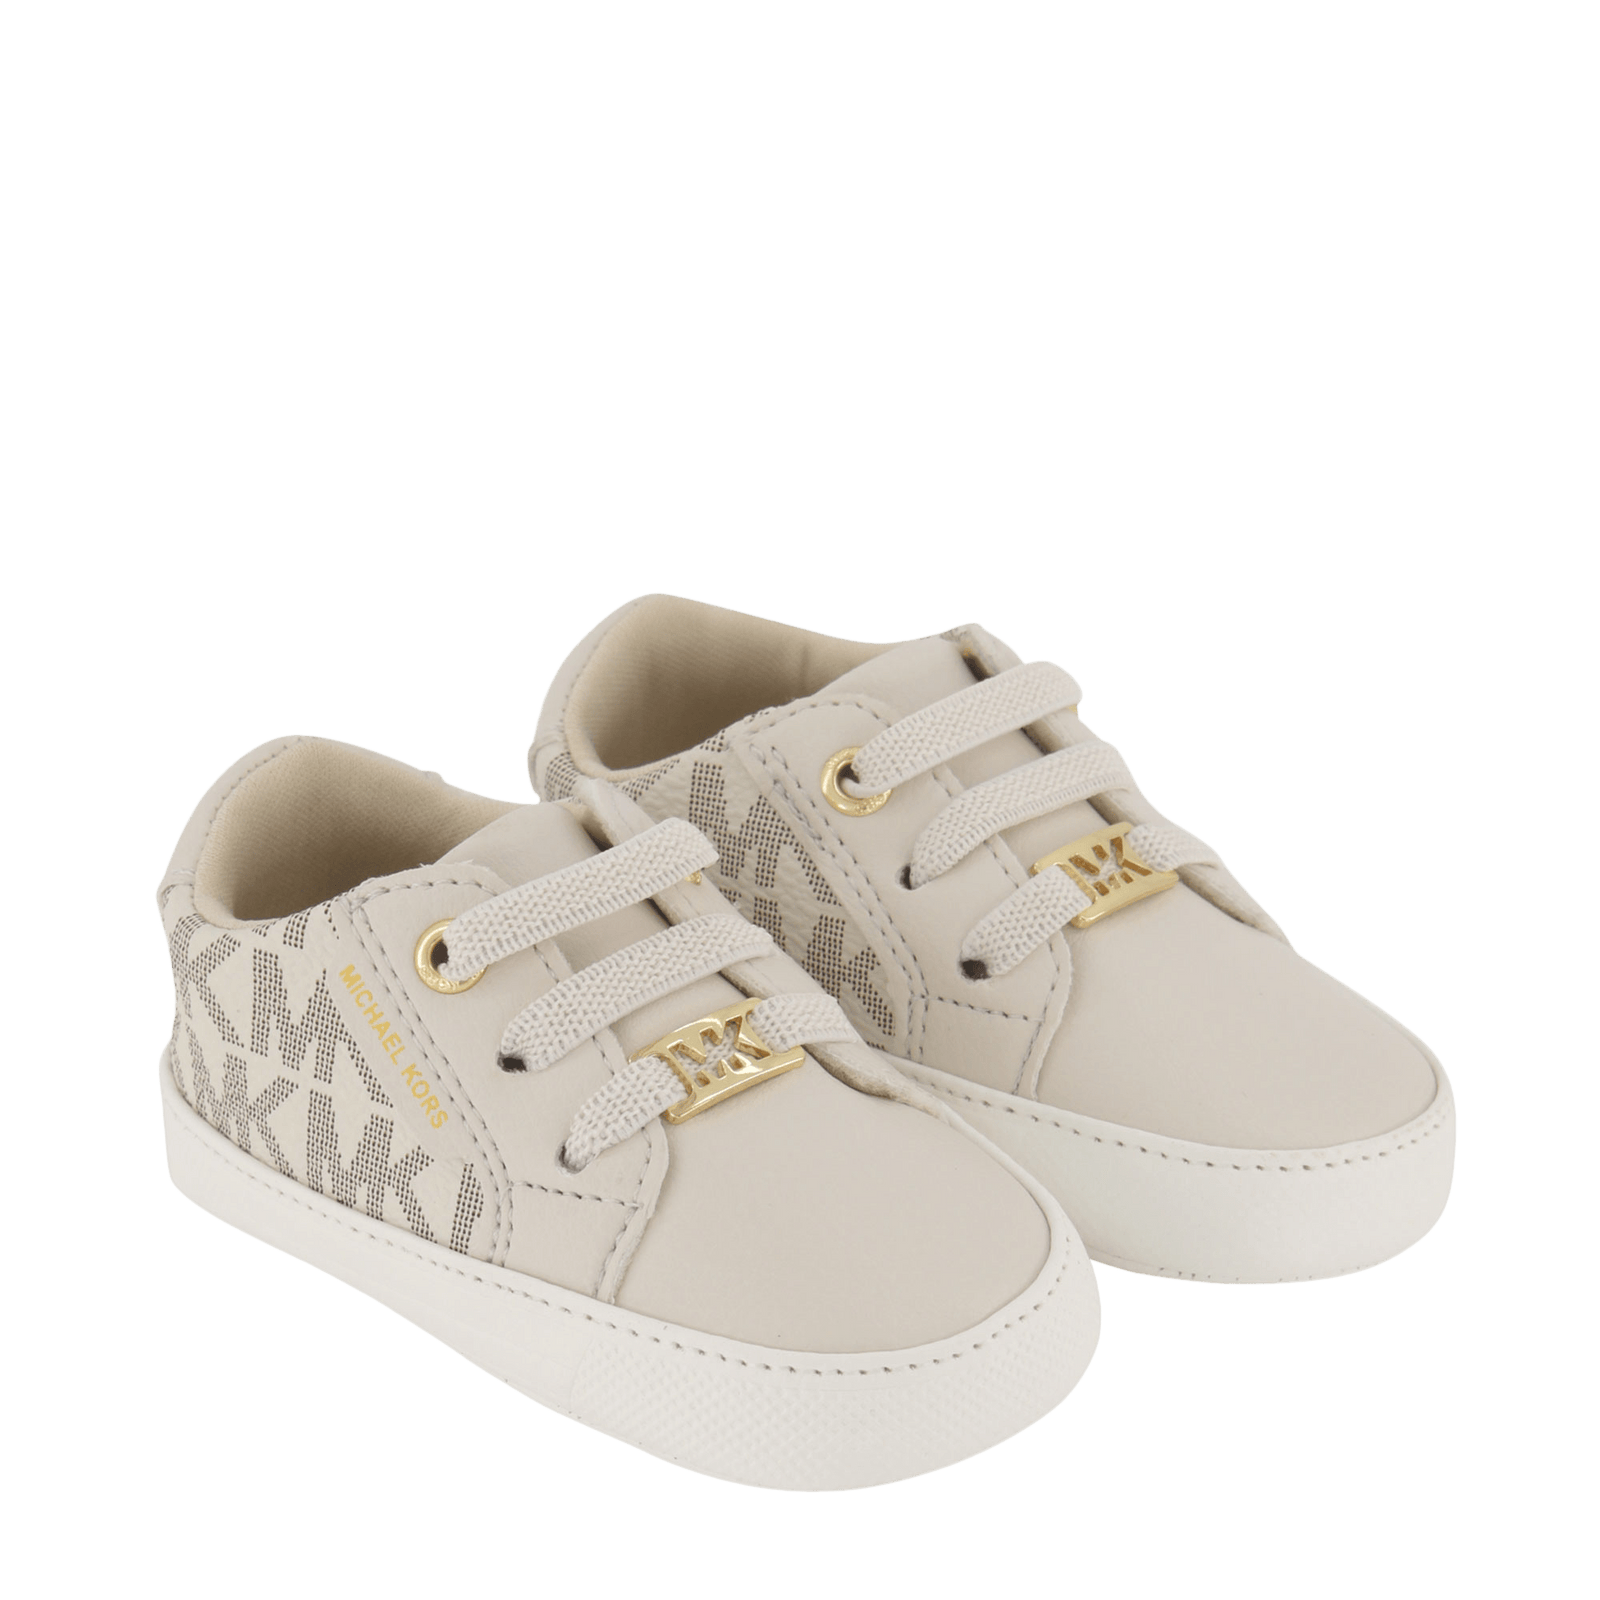 Michael Kors Baby Girls Shoes Off White